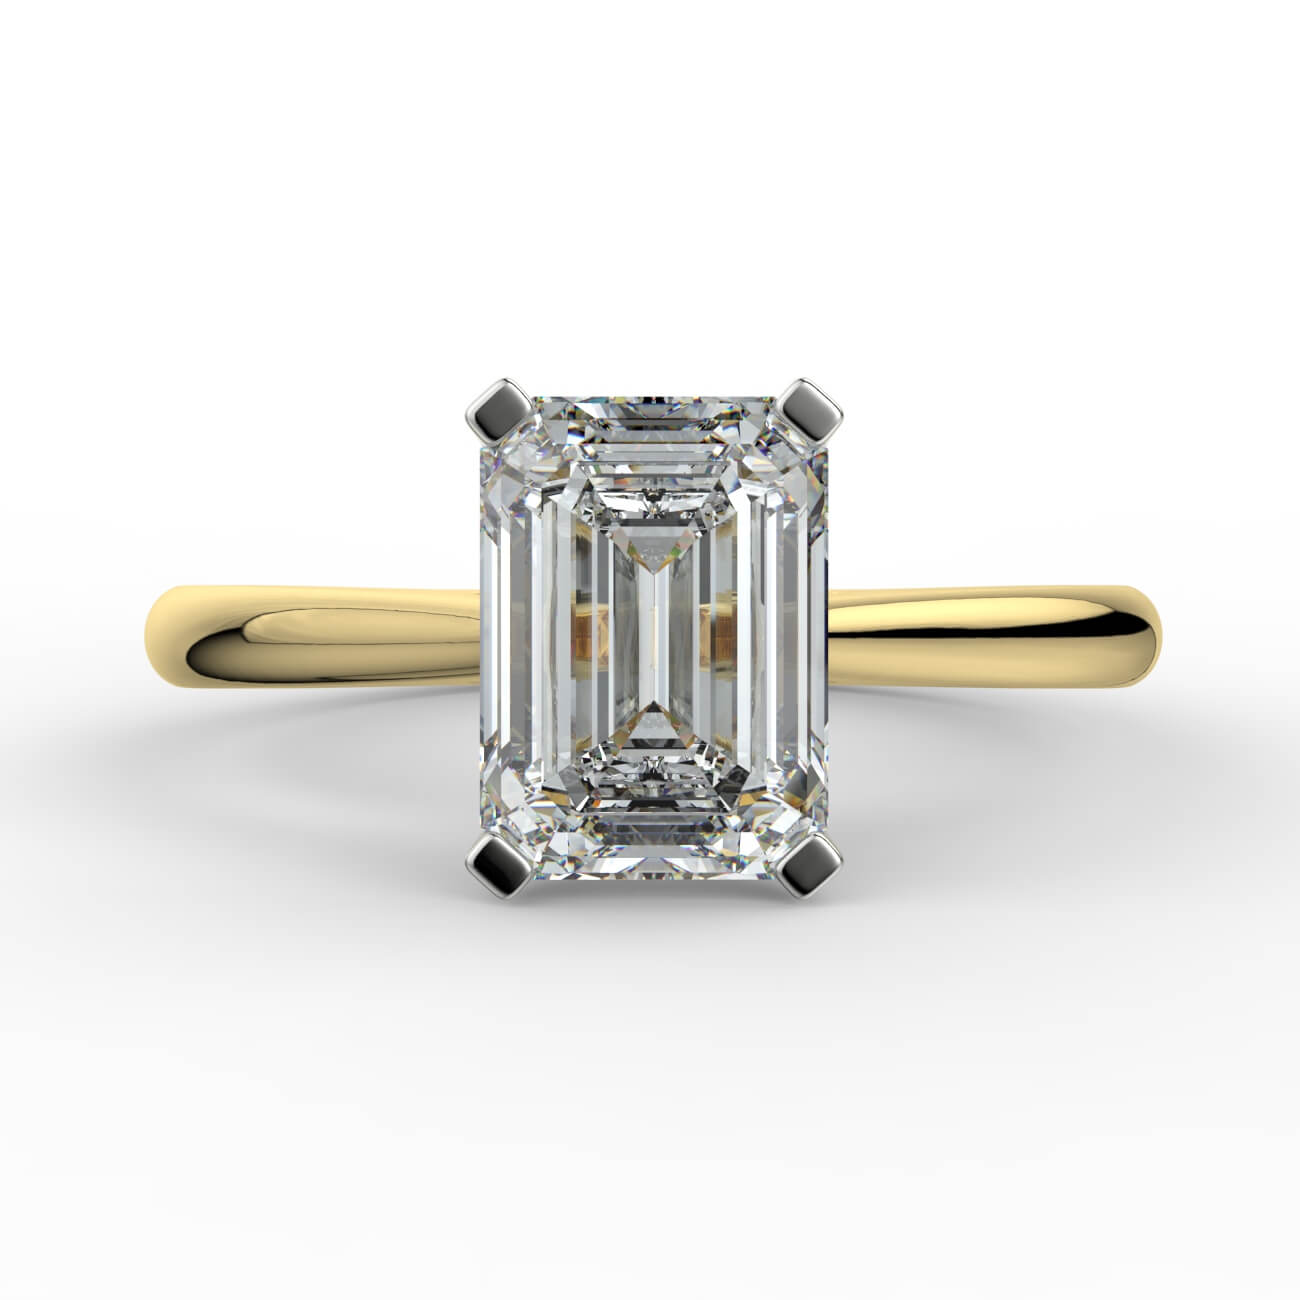 Emerald cut diamond cathedral engagement ring in white and yellow gold – Australian Diamond Network